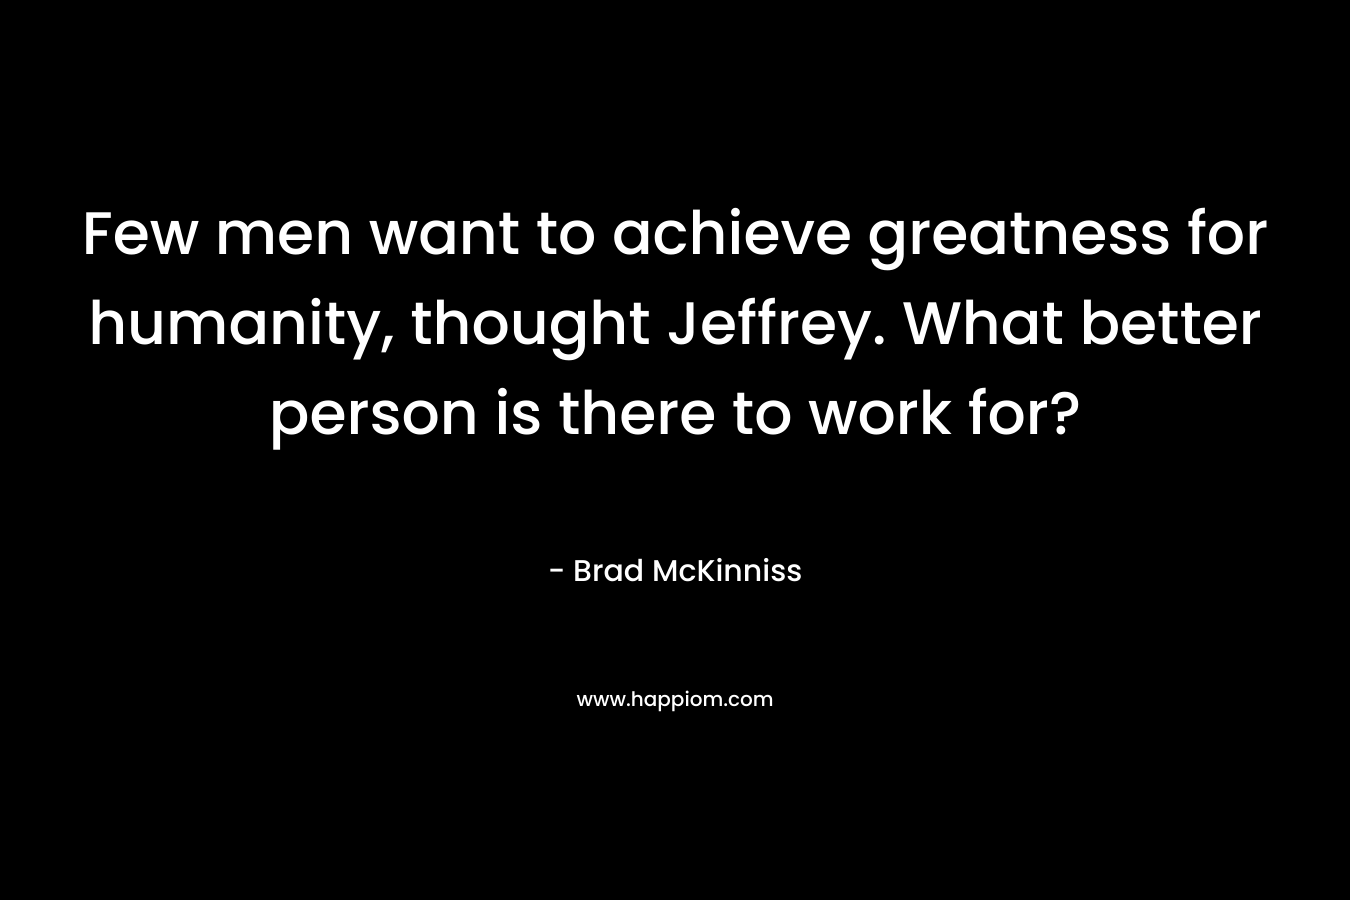 Few men want to achieve greatness for humanity, thought Jeffrey. What better person is there to work for? – Brad McKinniss